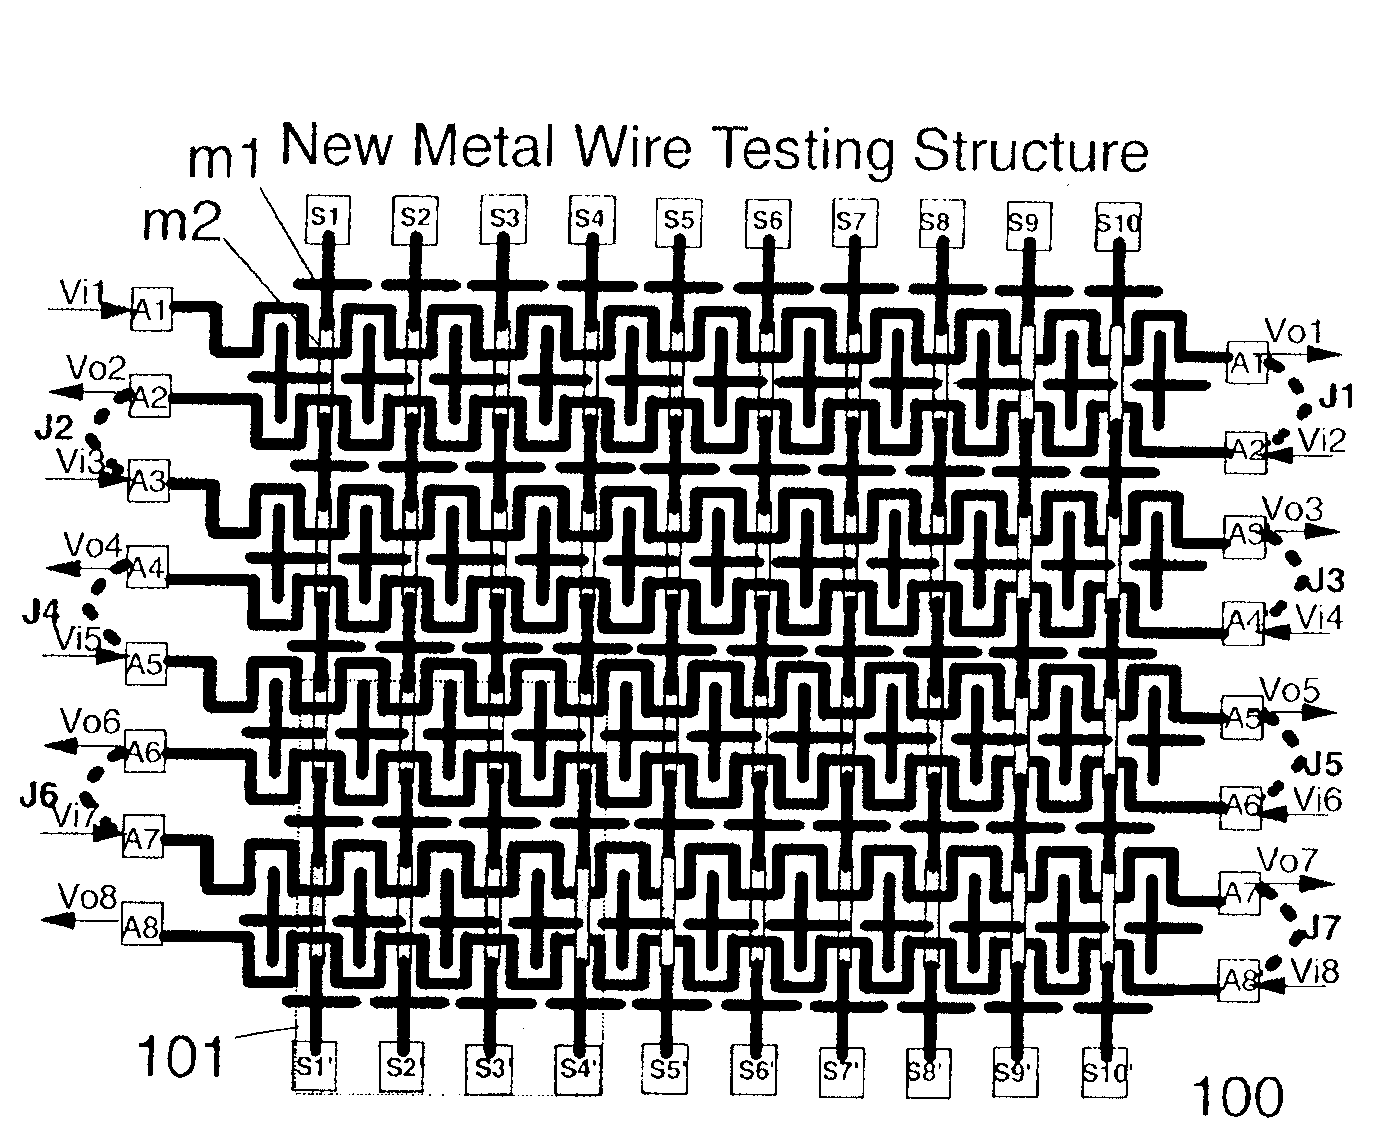 Addressable hierarchical metal wire test methodology